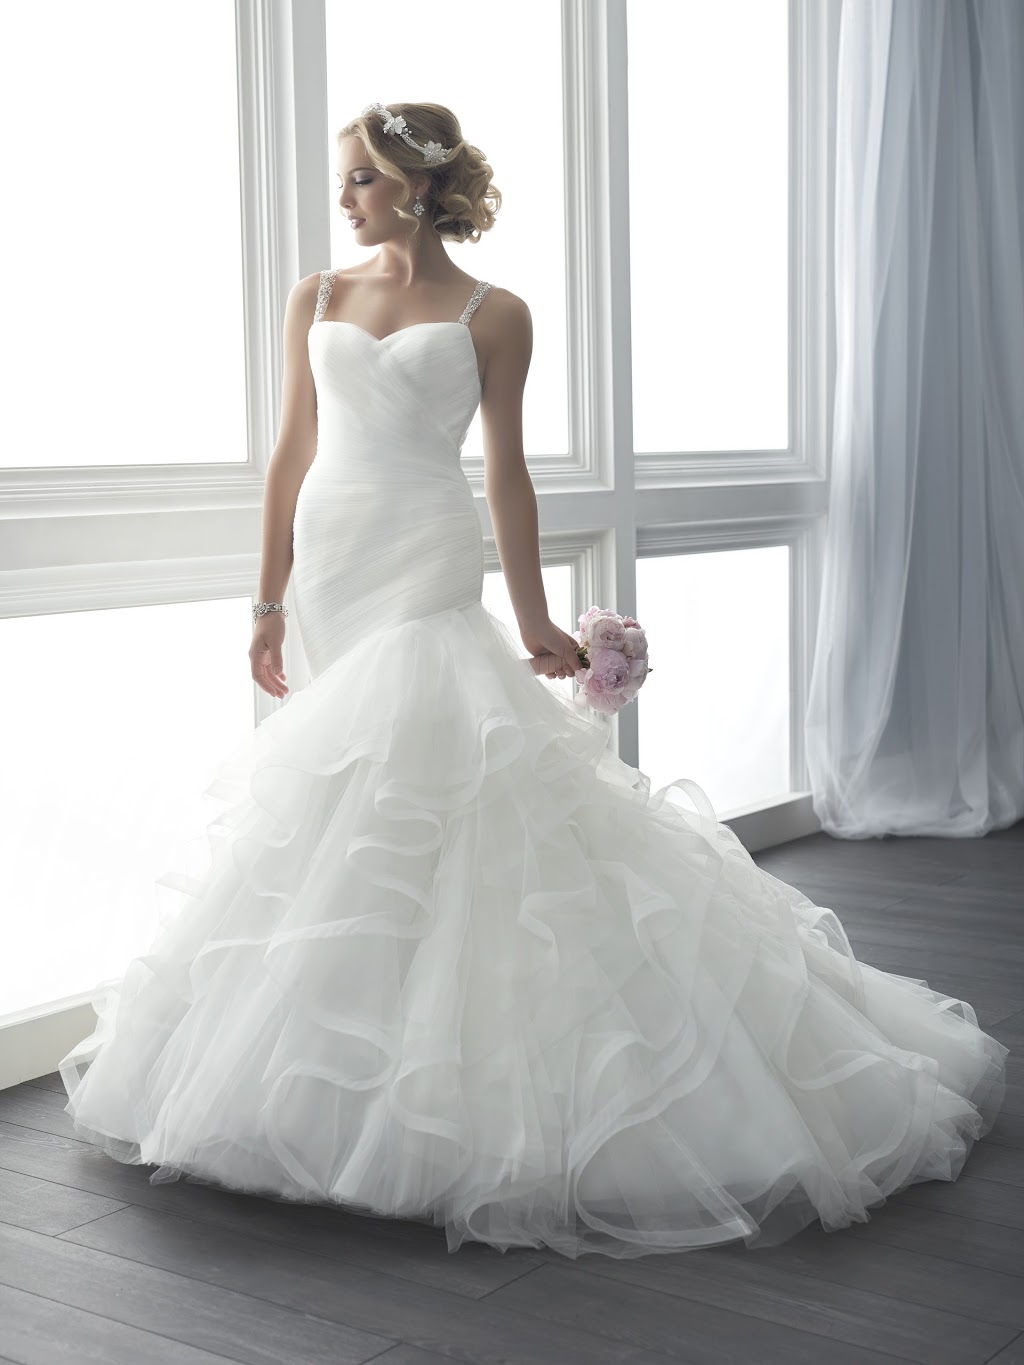 Jacquelin Bridals Canada | clothing store | 221 Wharncliffe Rd S, London, ON N6J 2L2, Canada | 5199630530 OR +1 519-963-0530